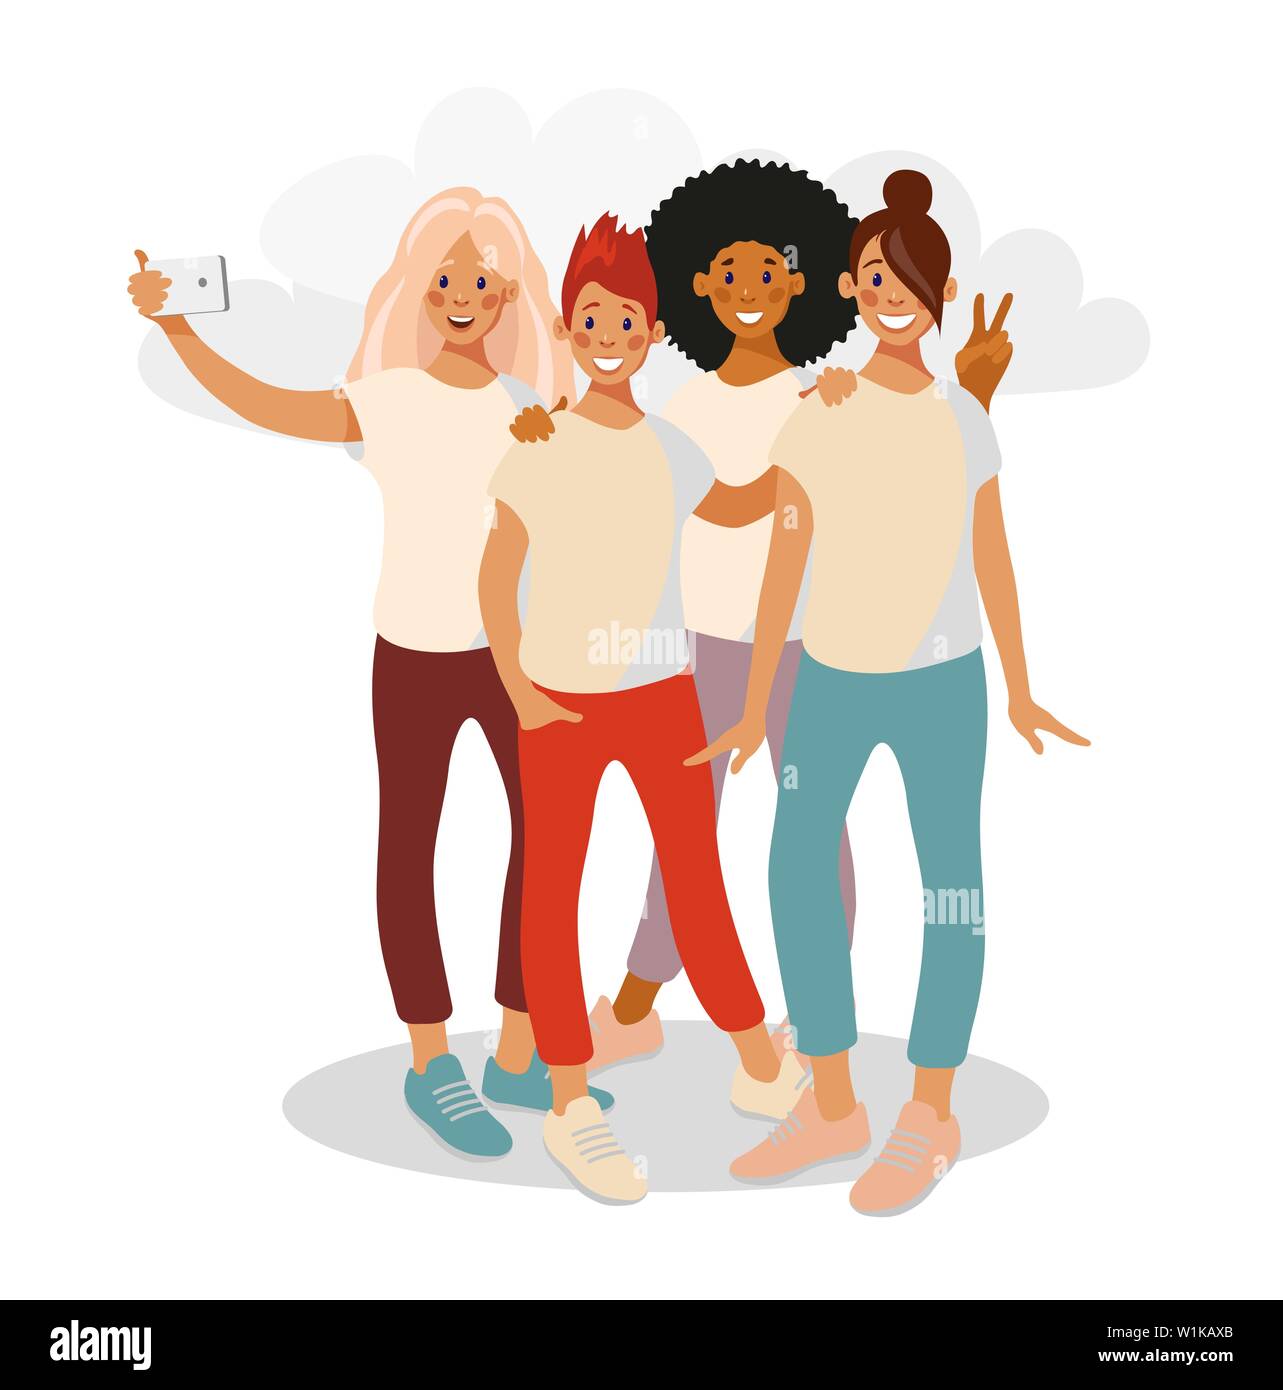 Teenage girl friends taking a selfie on camera phone. A group of four girls of different nationalities photograph selfies in casual clothes. Vector illustration in flat cartoon style. Stock Vector